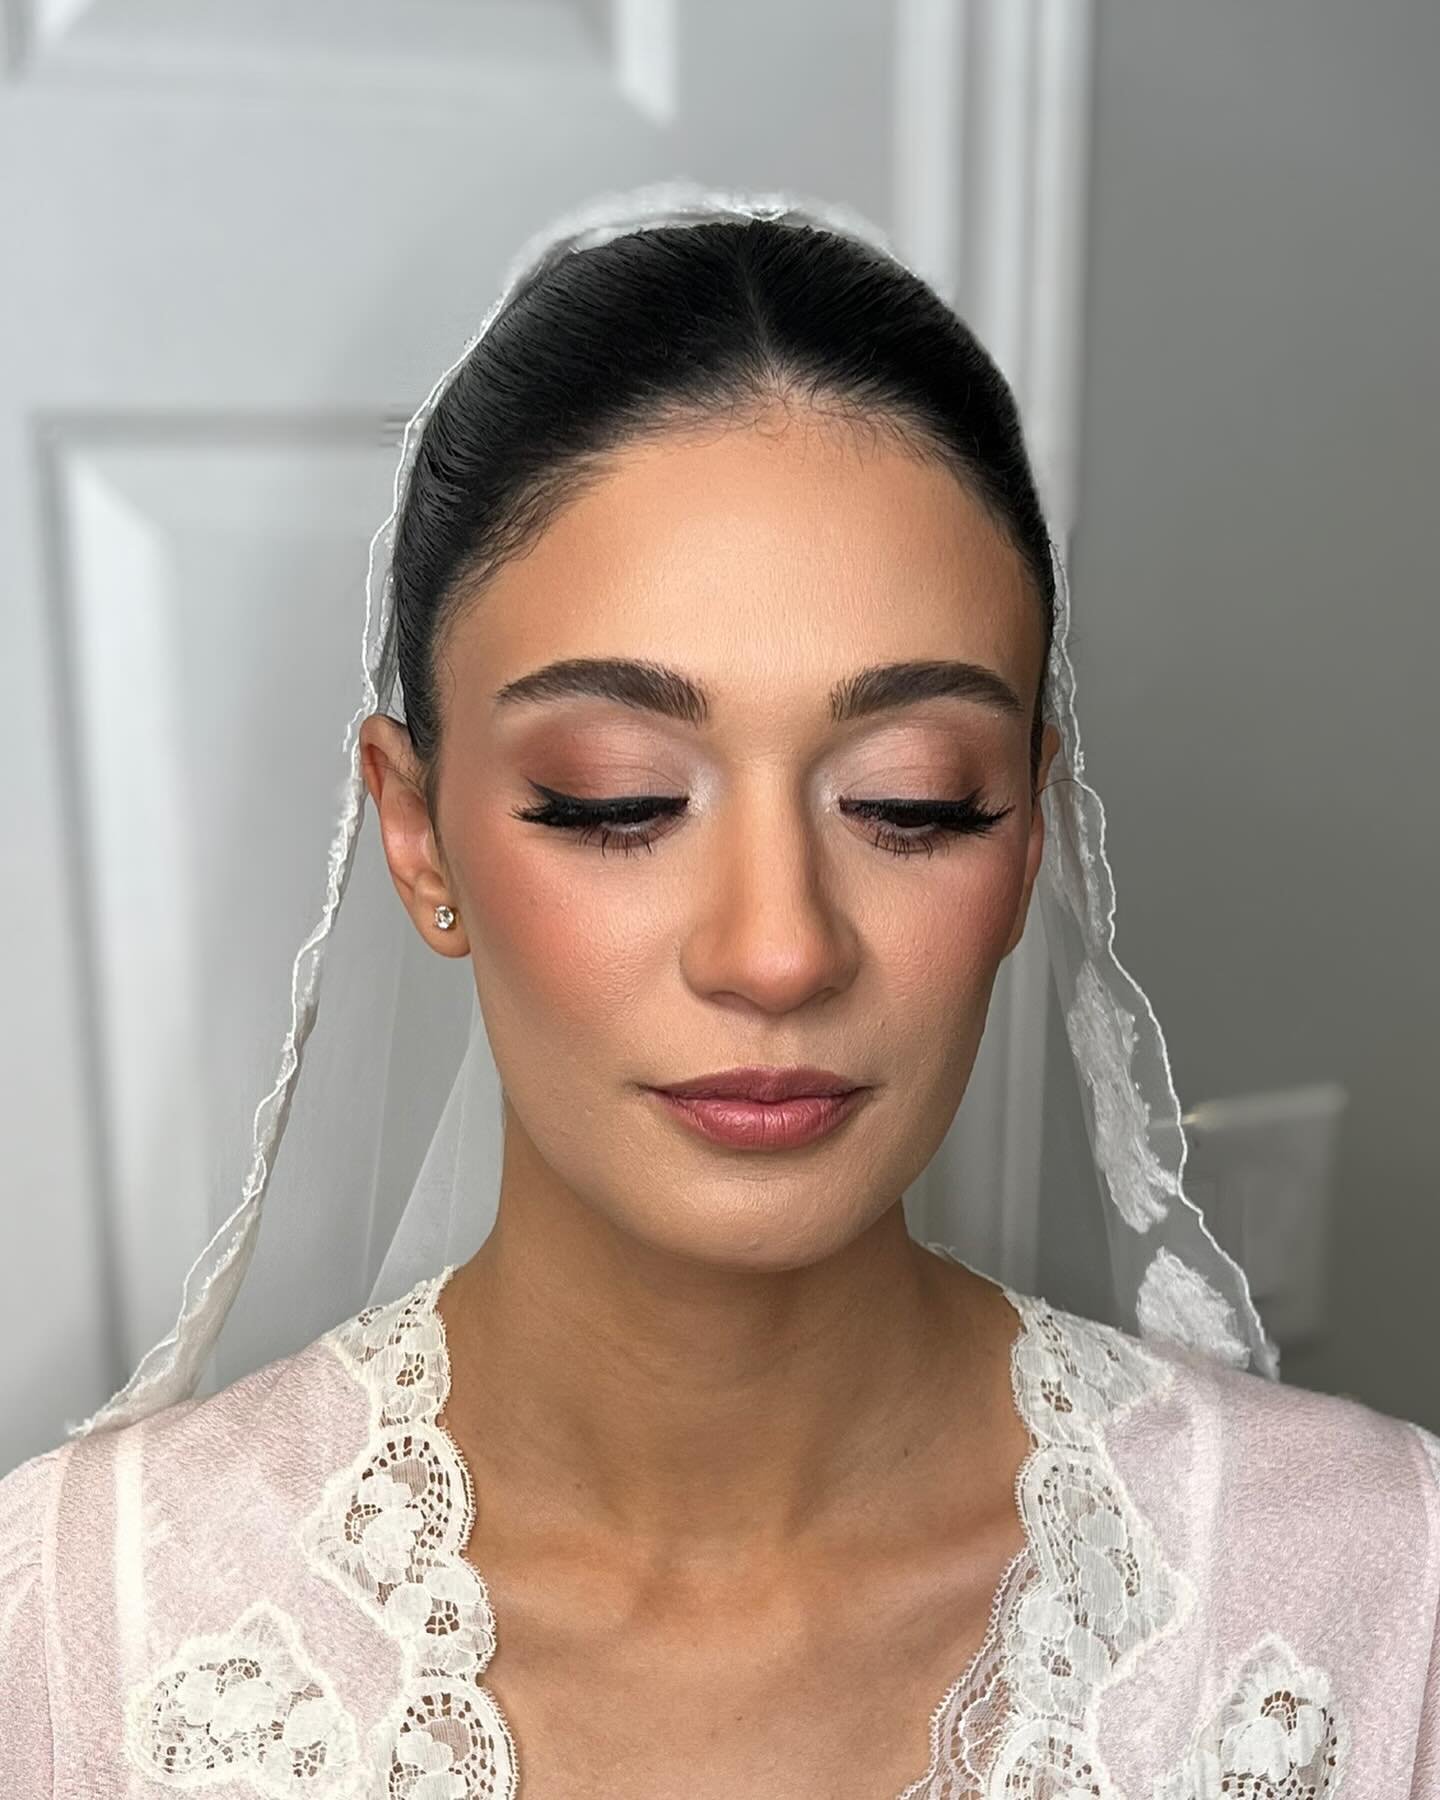 An angel IRL 👰🏻 

Makeup by yours truly

Contact: lilyhobeauty@gmail.com 
Www.lilyhobeauty.com

‼️ please check your spam and junk folders for email responses ‼️ 

Now booking 2024/2025 weddings and events. 

#torontowedding #torontomakeupartist #t